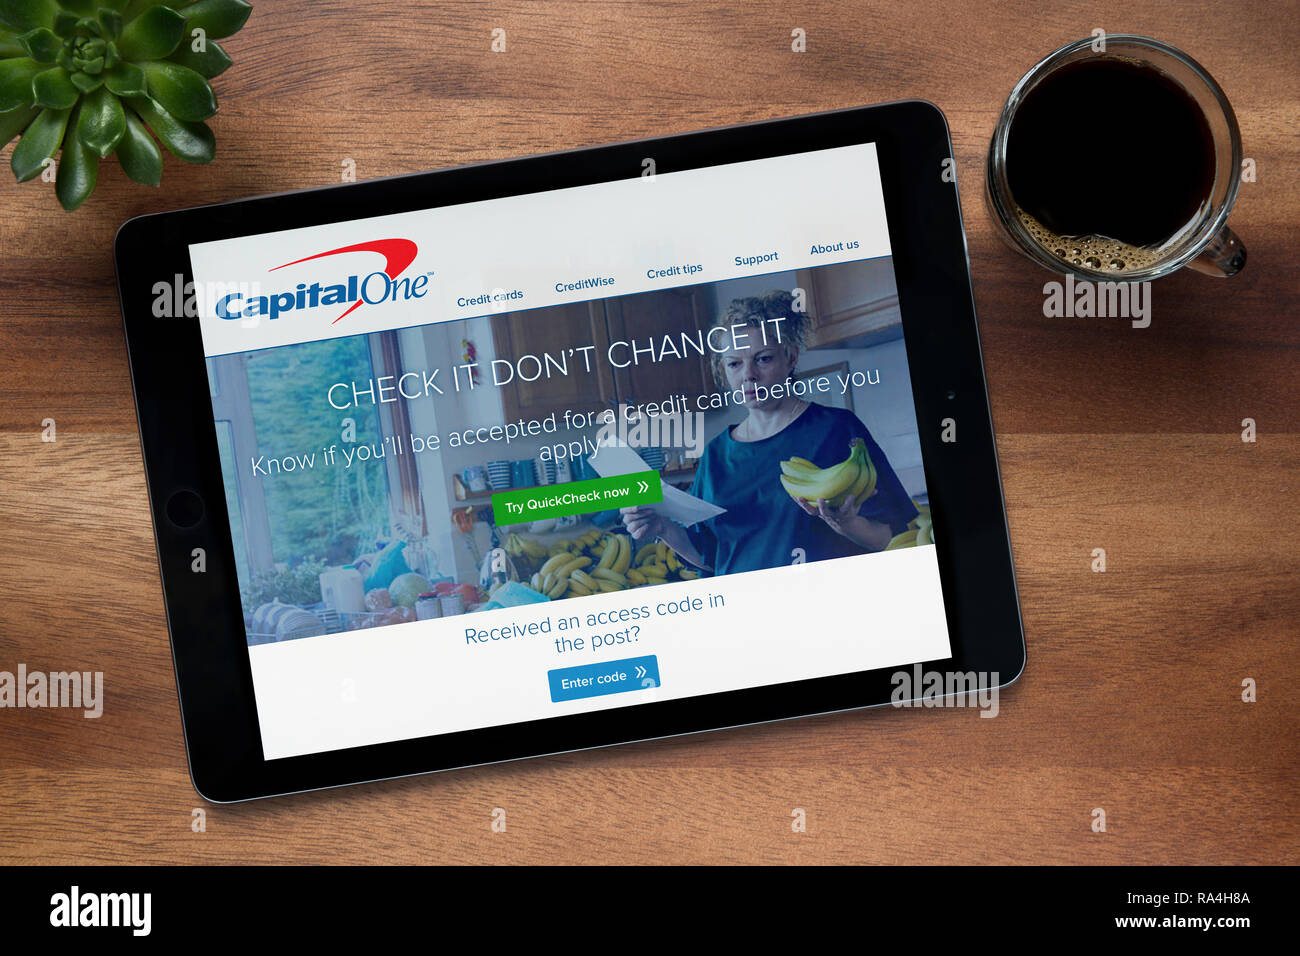 The website of Capital One is seen on an iPad tablet, on a wooden table along with an espresso coffee and a house plant (Editorial use only). Stock Photo